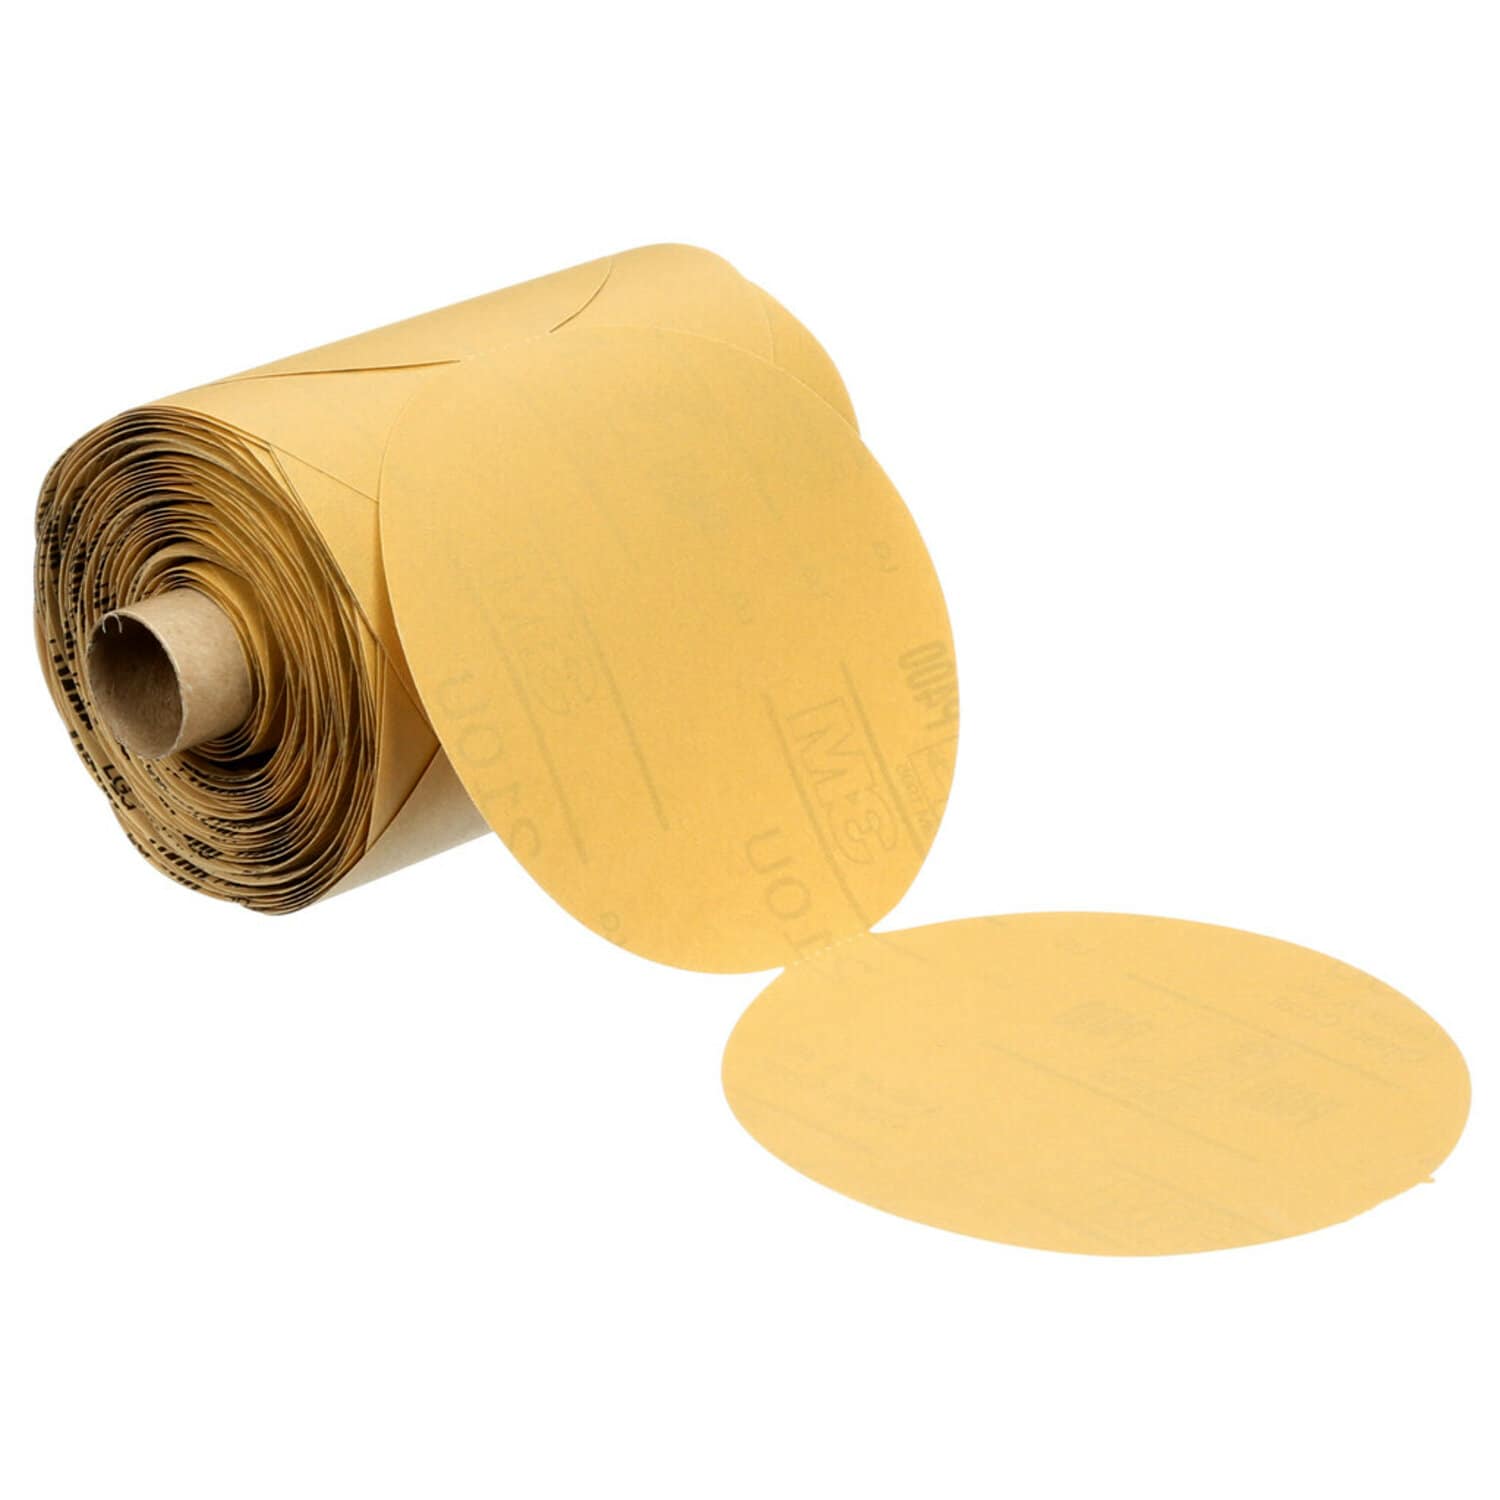 7100069986 - 3M Stikit Paper Disc Roll 210U, P500 A-weight, Config